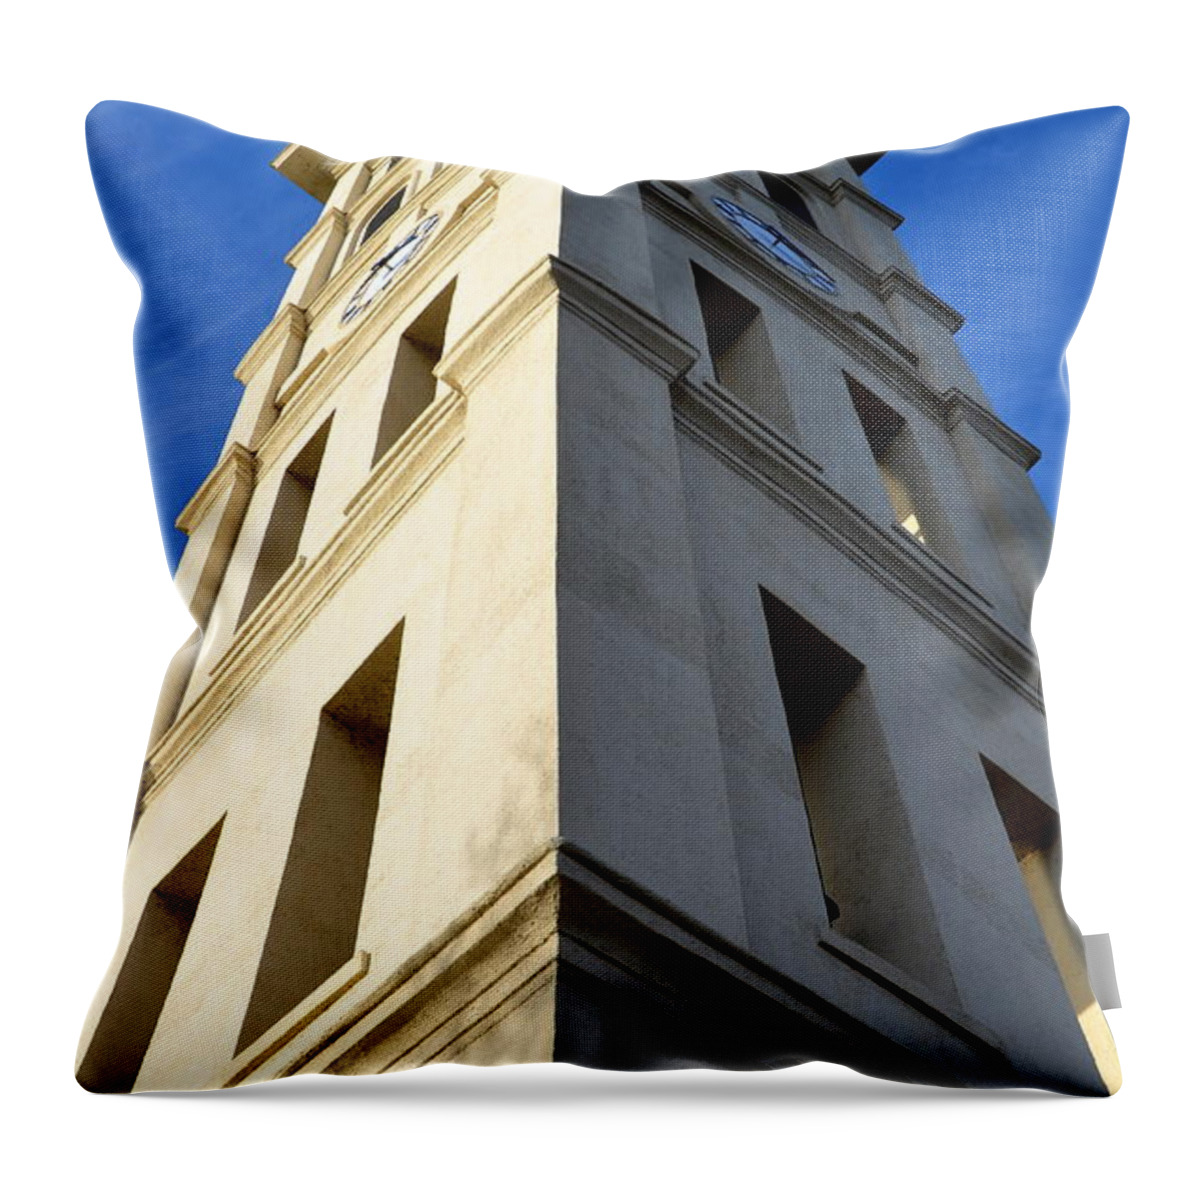 Angles Throw Pillow featuring the photograph Extreme Angles by Corinne Rhode